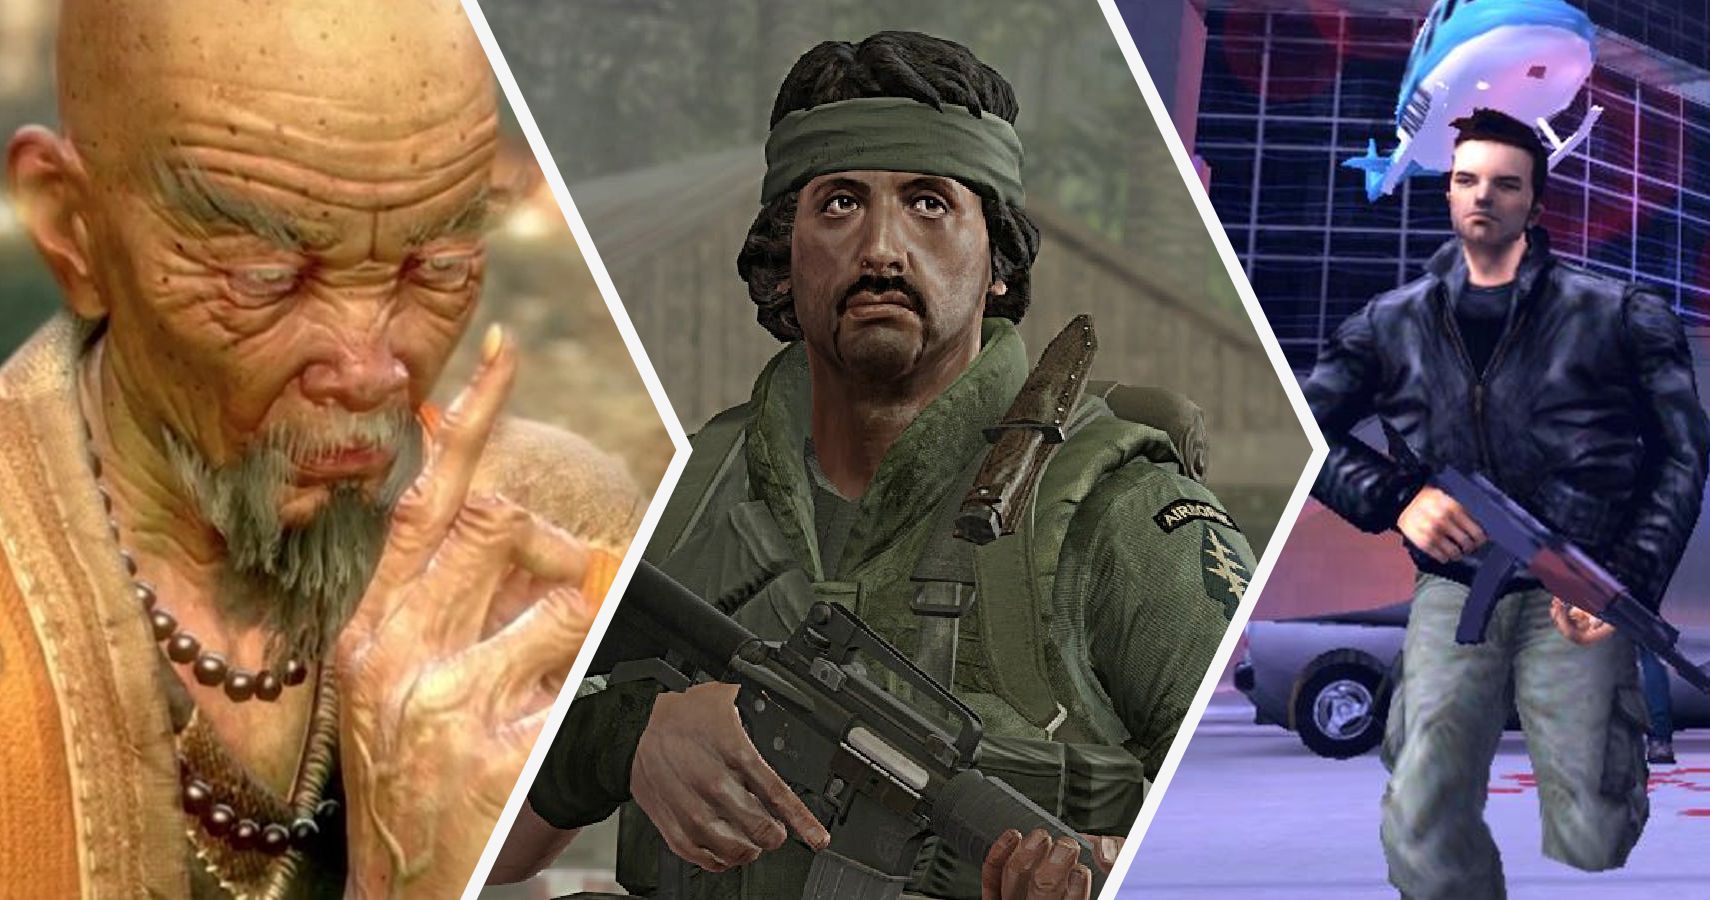 The 15 Lamest Console Games Of All Time According To Metacritic (And 15  That Are Nearly Perfect)